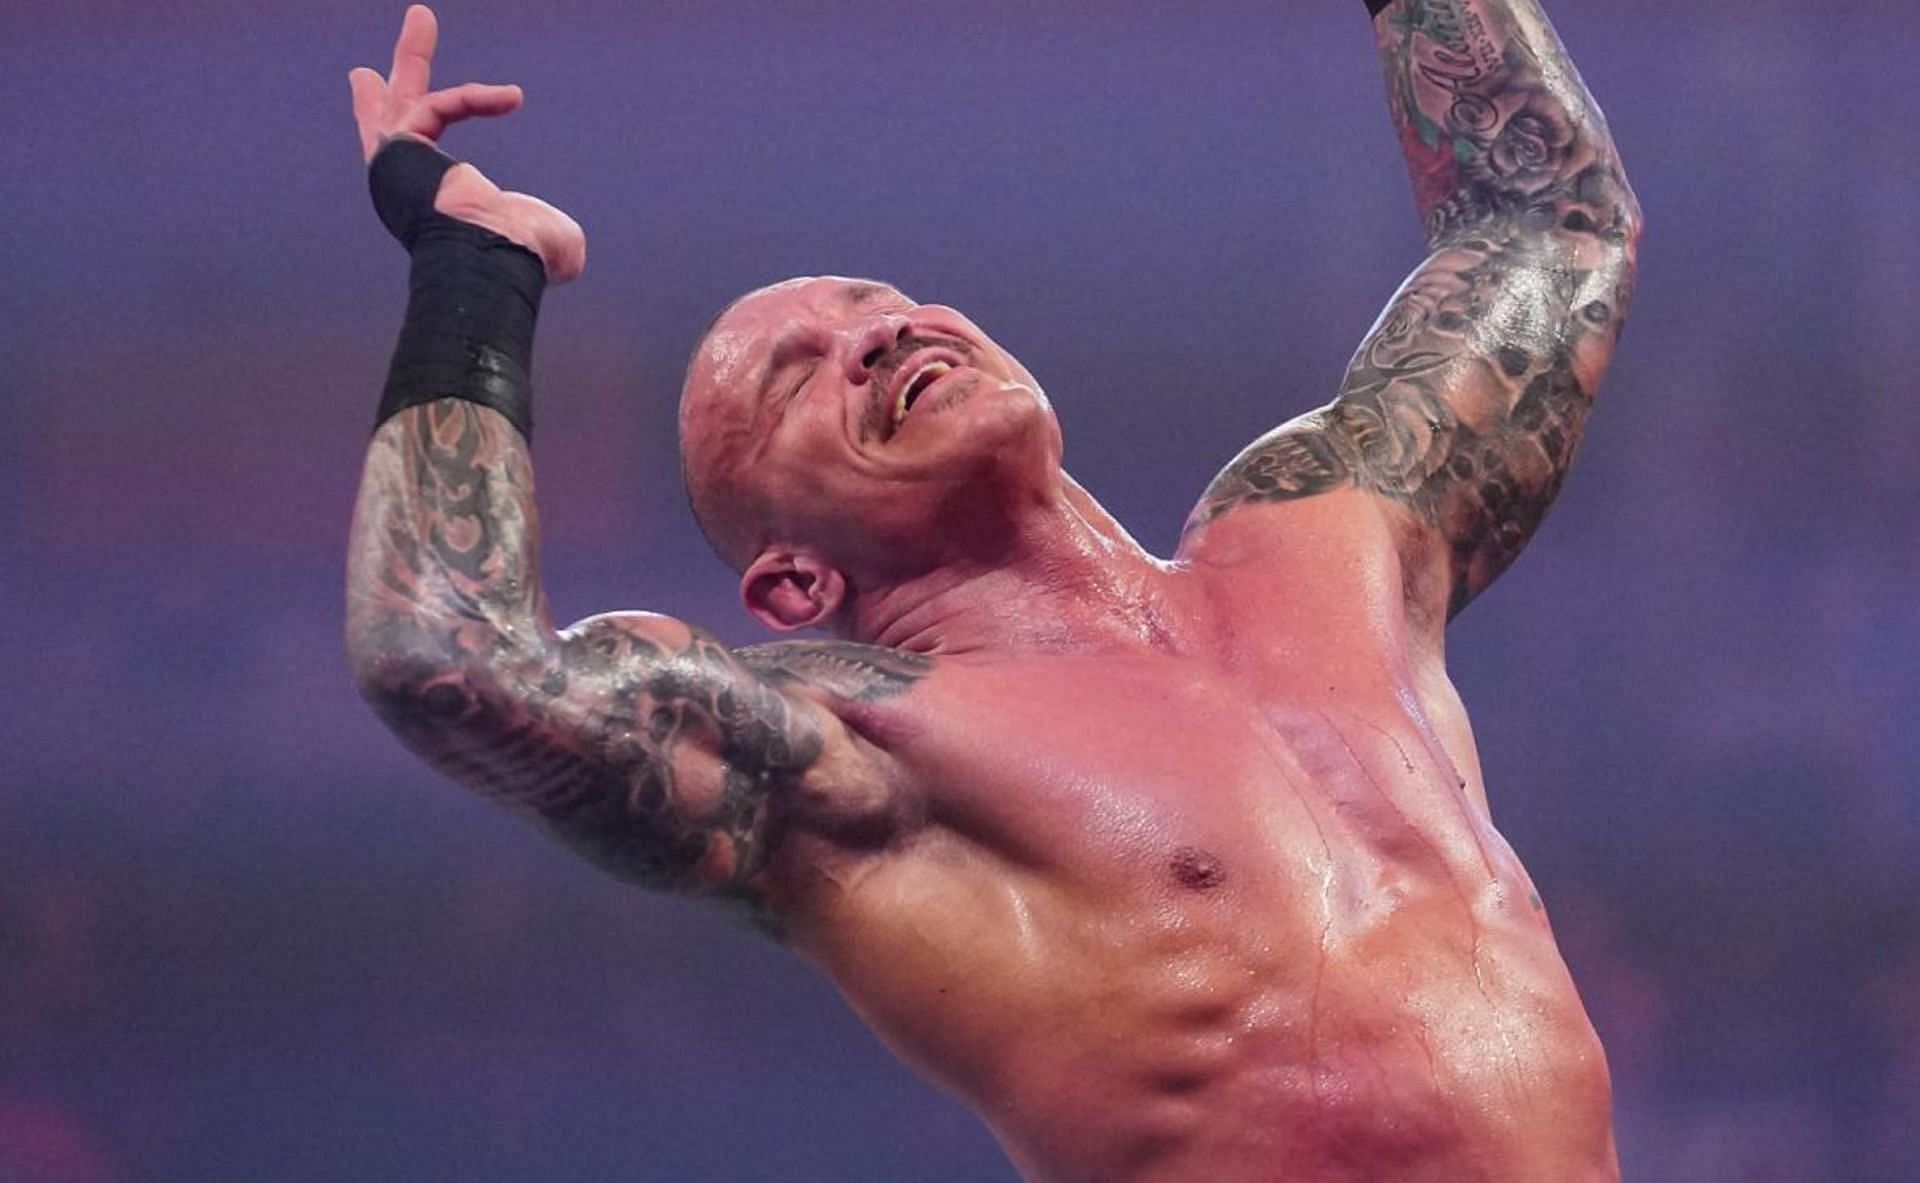 Randy Orton is a 14-time World Champion